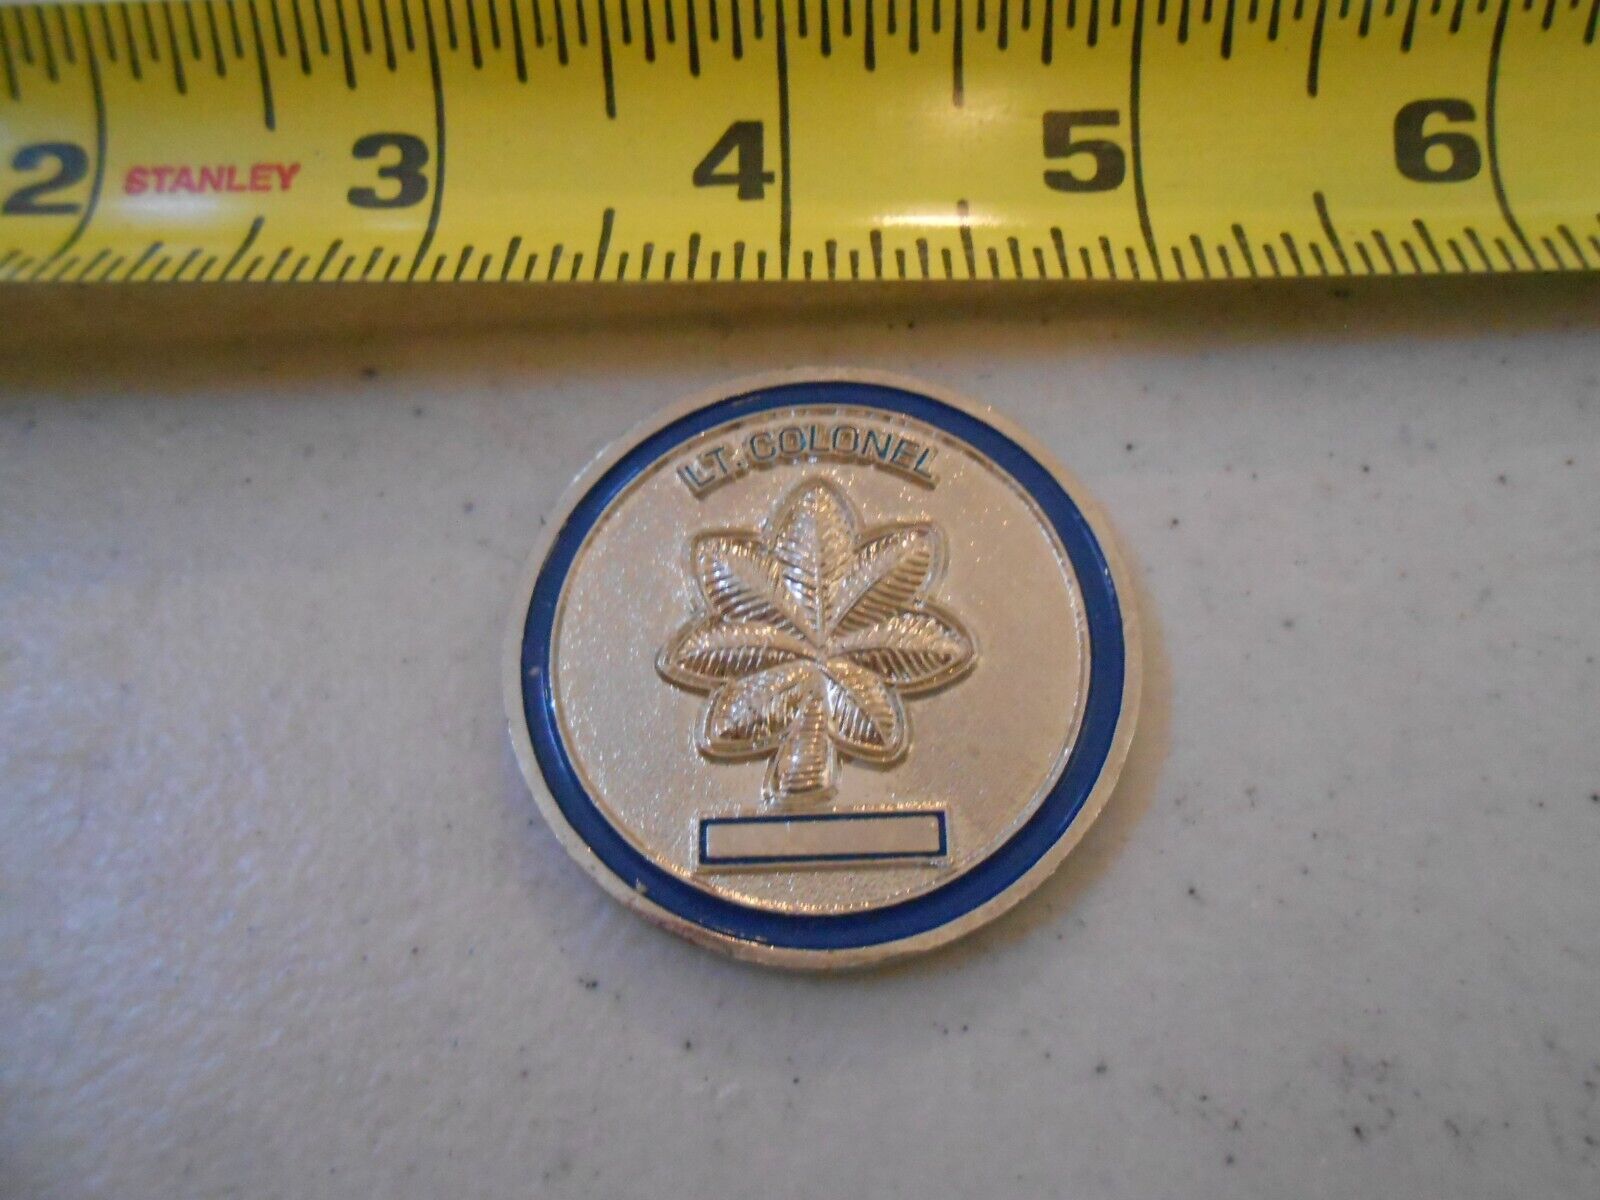 RARE LT. COLONEL USAF UNITED STATES AIR FORCE MILITARY CHALLENGE COIN